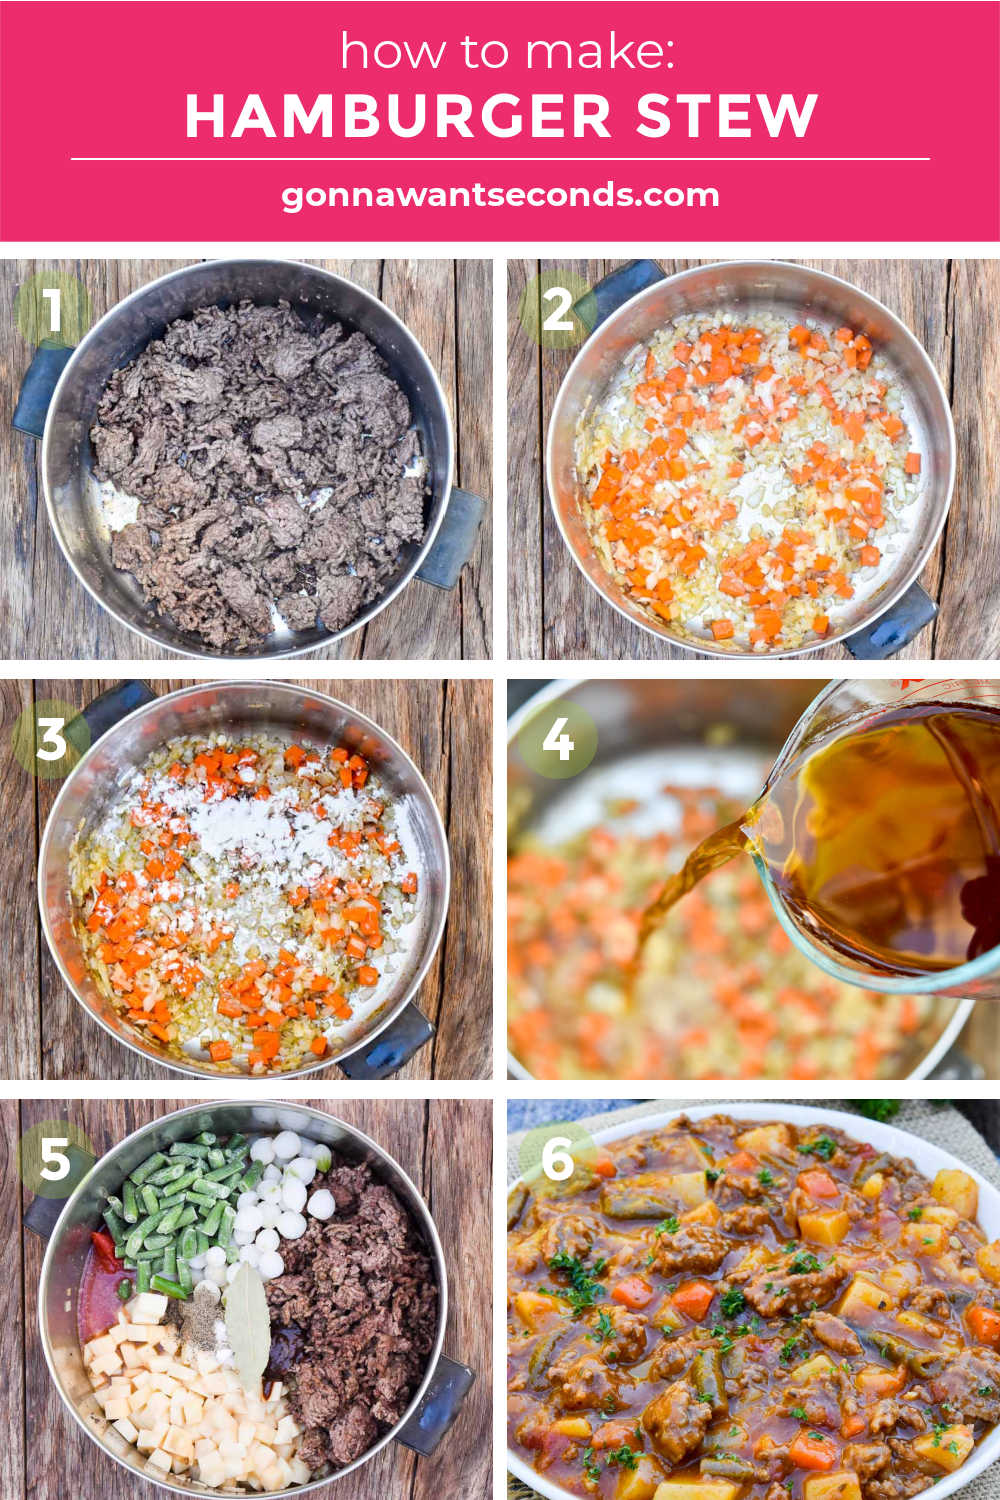 Step by step how to make hamburger stew